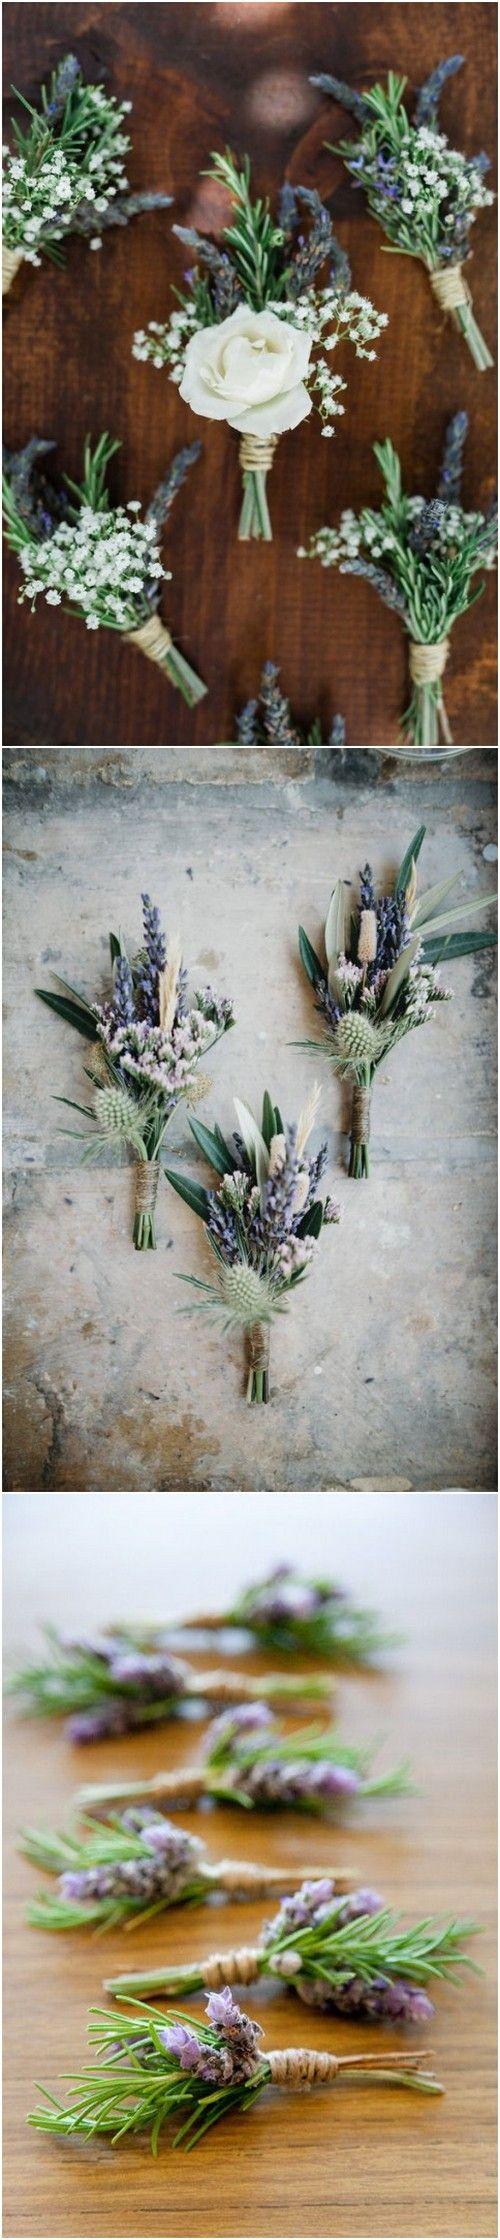 Wedding - Top 28 Stunning Lavender Wedding Ideas To Inspire Your Big Day - Page 2 Of 2